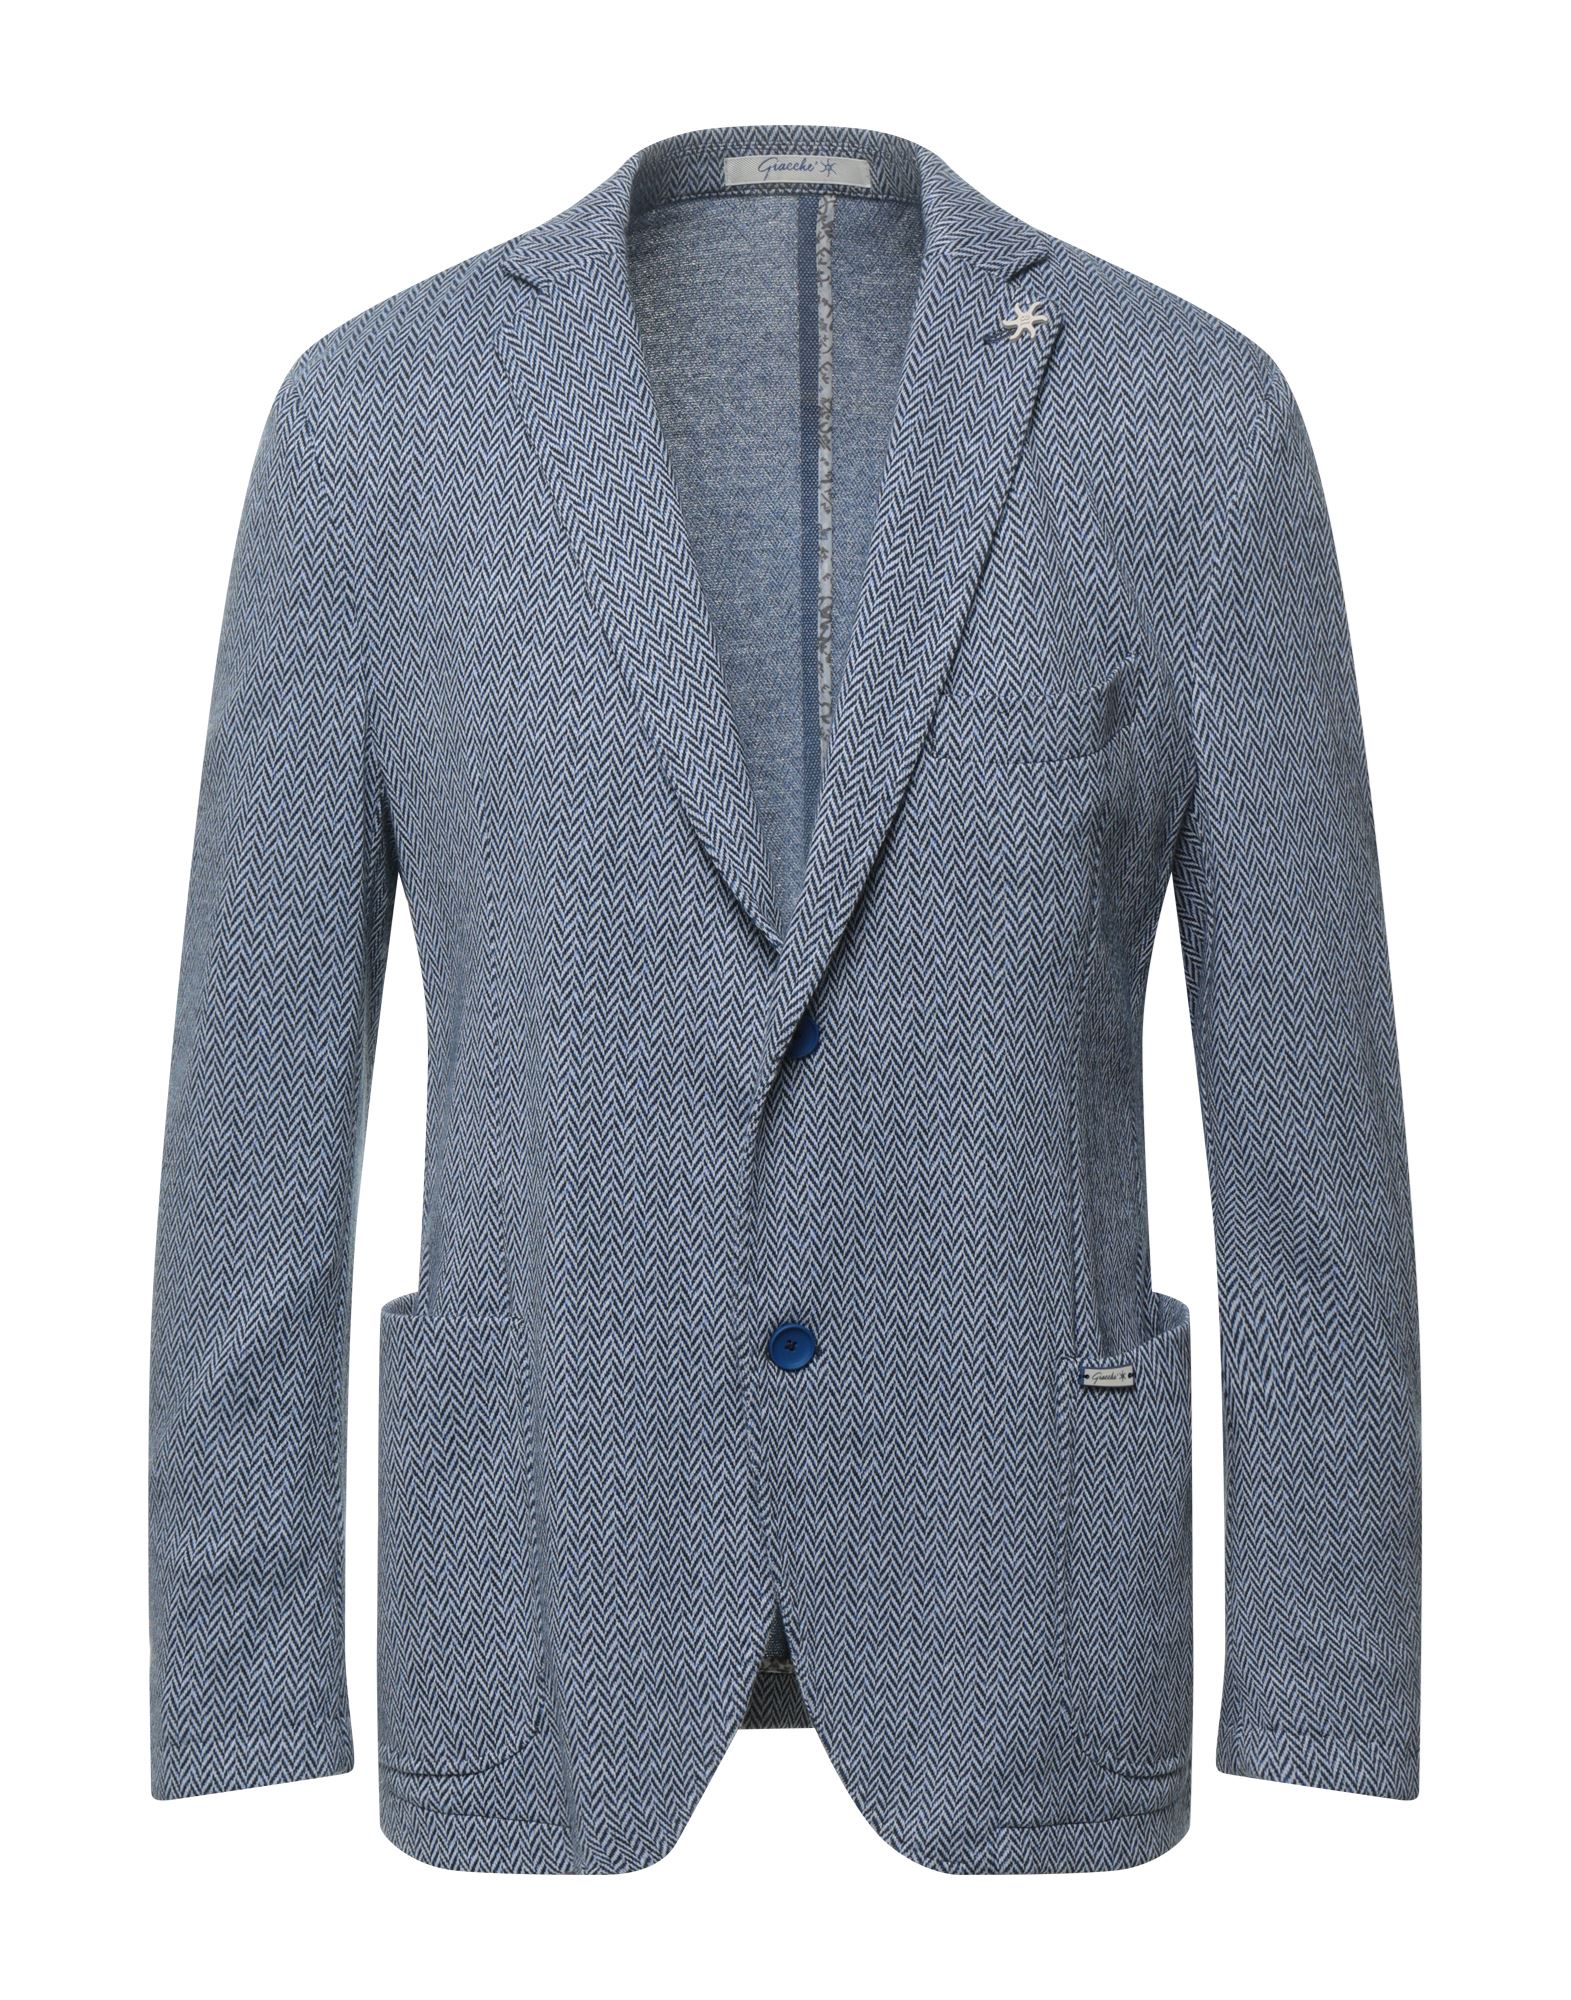 GIACCHE' Suit jackets